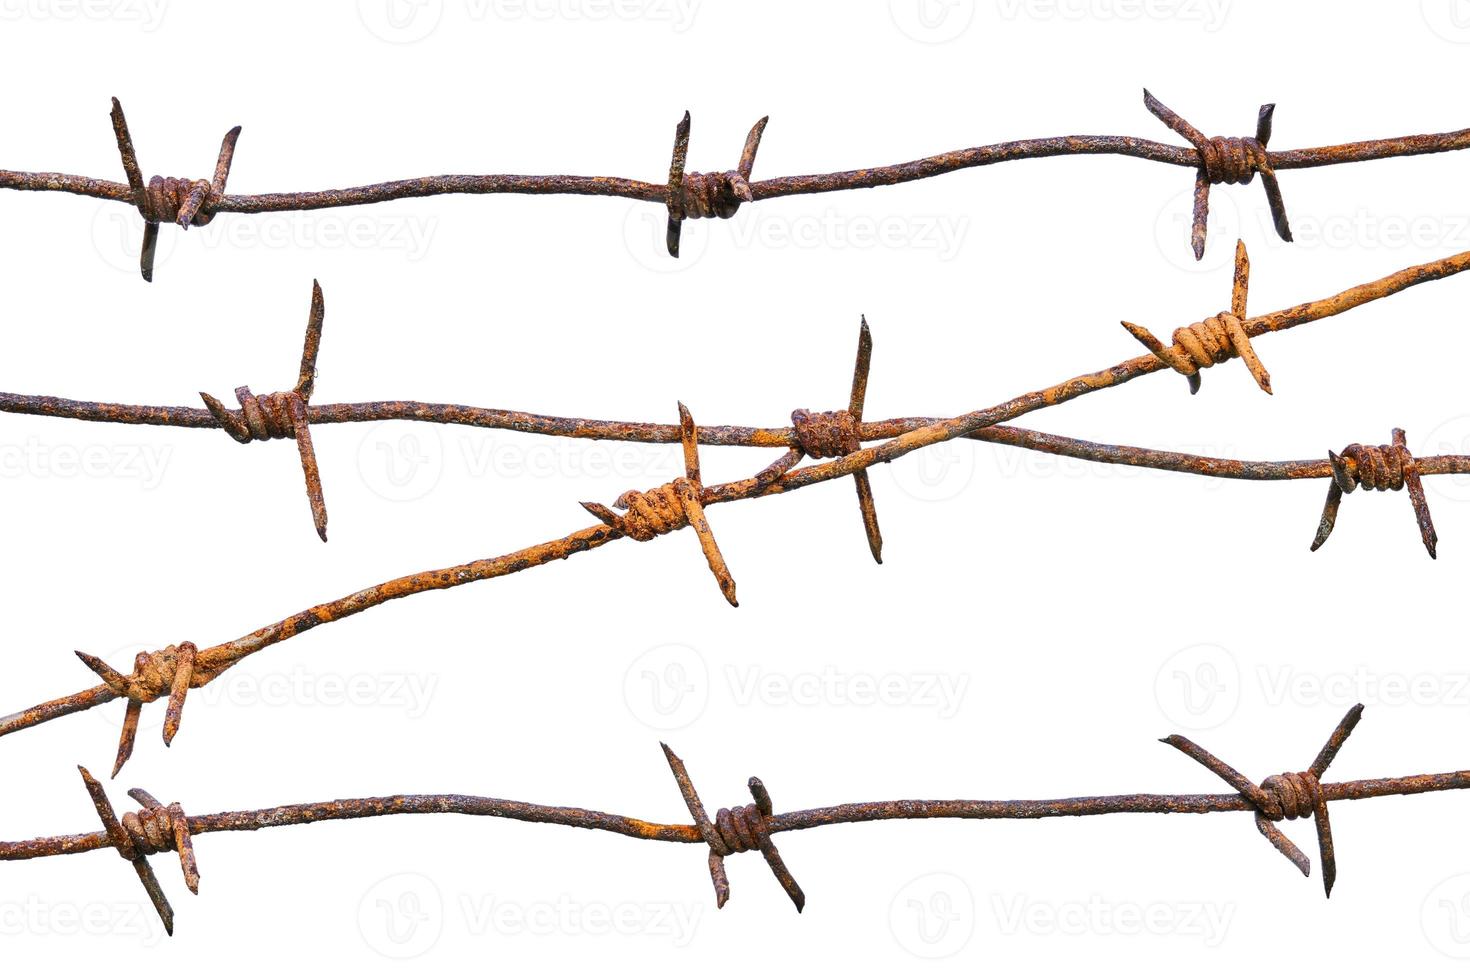 Rusty sharp barbed wires isolated on white background photo